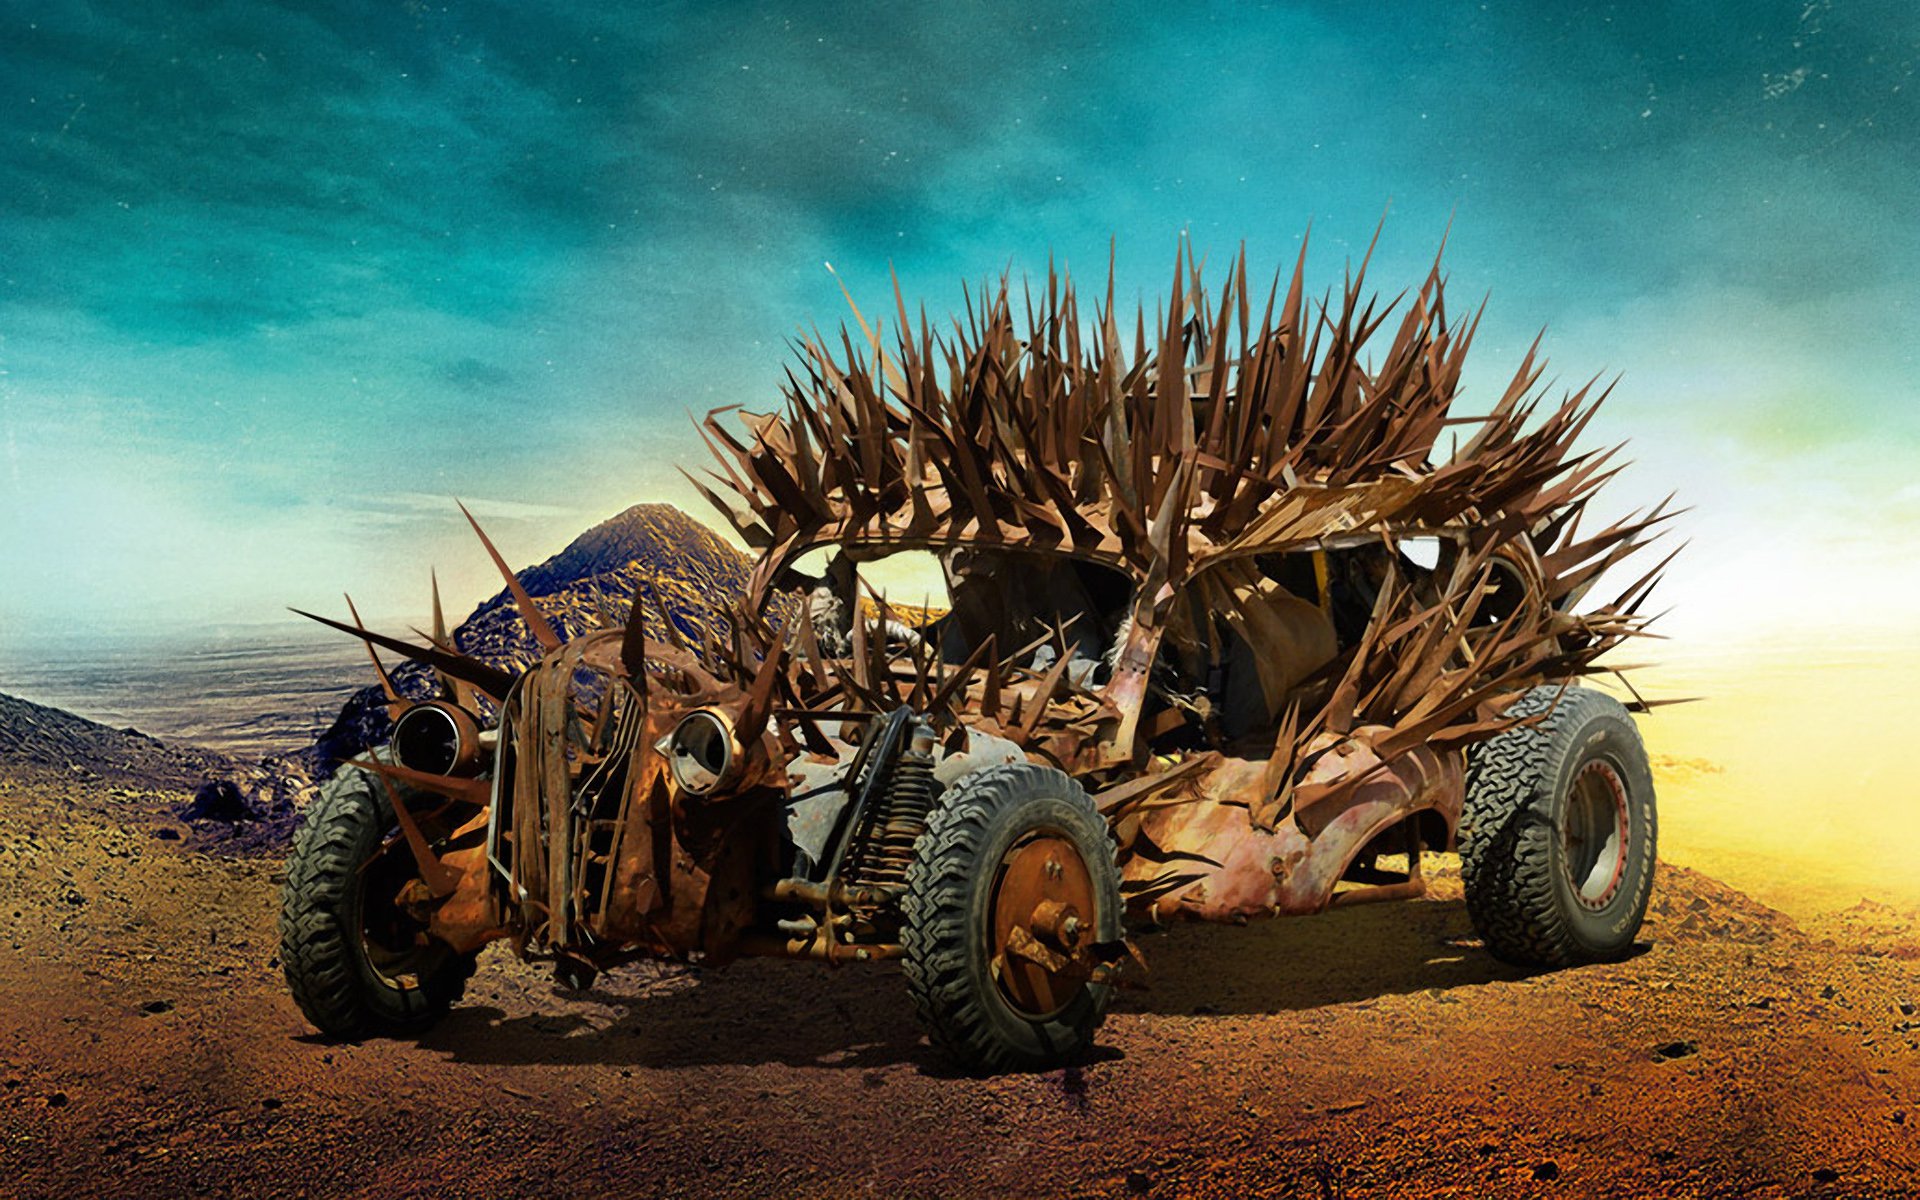 Mad Max Fury Road Hd Wallpaper Background Image 19x10 Id 6168 Wallpaper Abyss